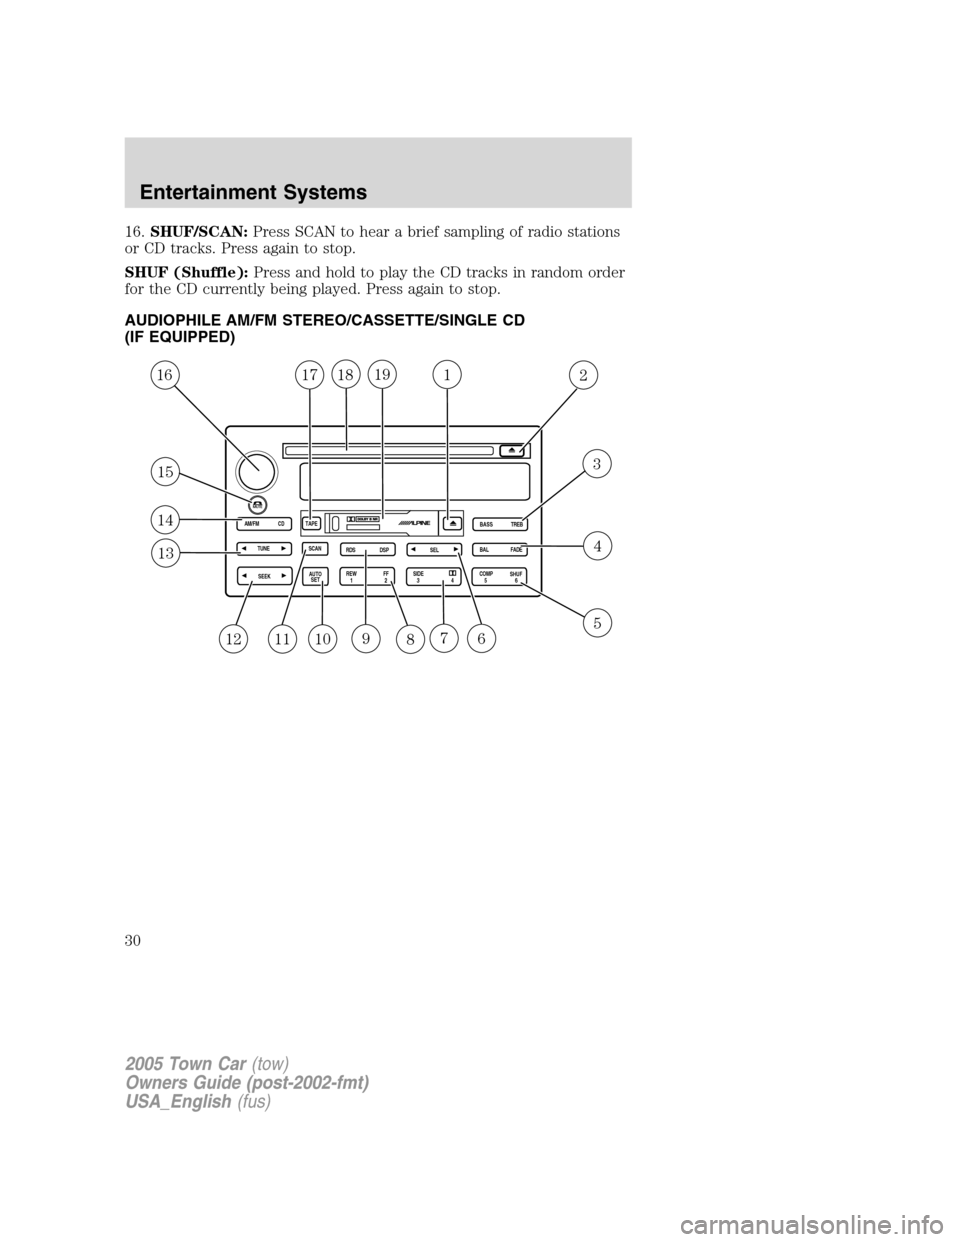 LINCOLN TOWN CAR 2005  Owners Manual 16.SHUF/SCAN:Press SCAN to hear a brief sampling of radio stations
or CD tracks. Press again to stop.
SHUF (Shuffle):Press and hold to play the CD tracks in random order
for the CD currently being pla